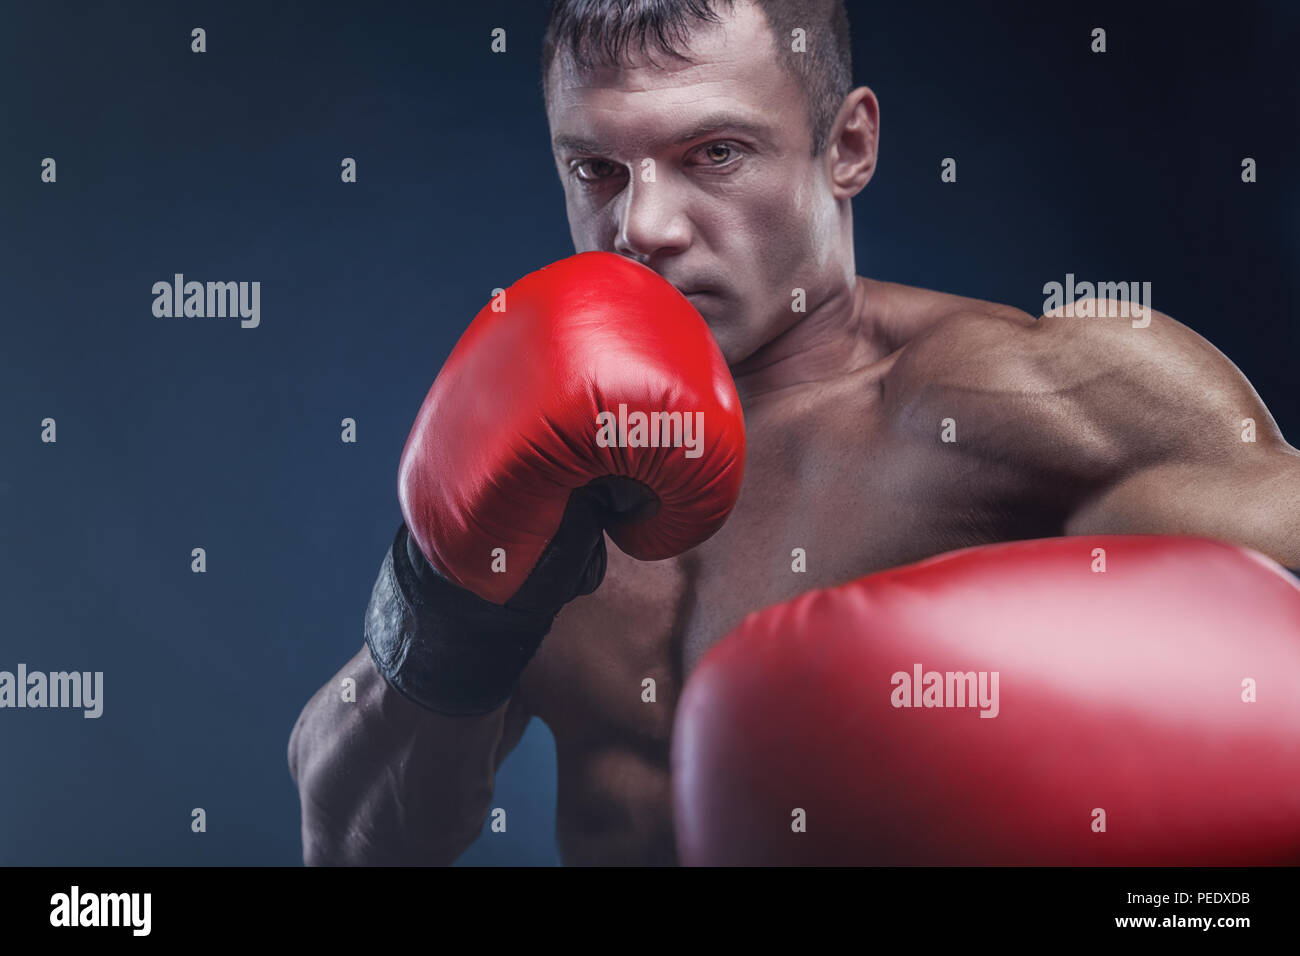 Boxing concept. Boxer with an aggressive look in red boxing gloves before a fight against a black background Stock Photo